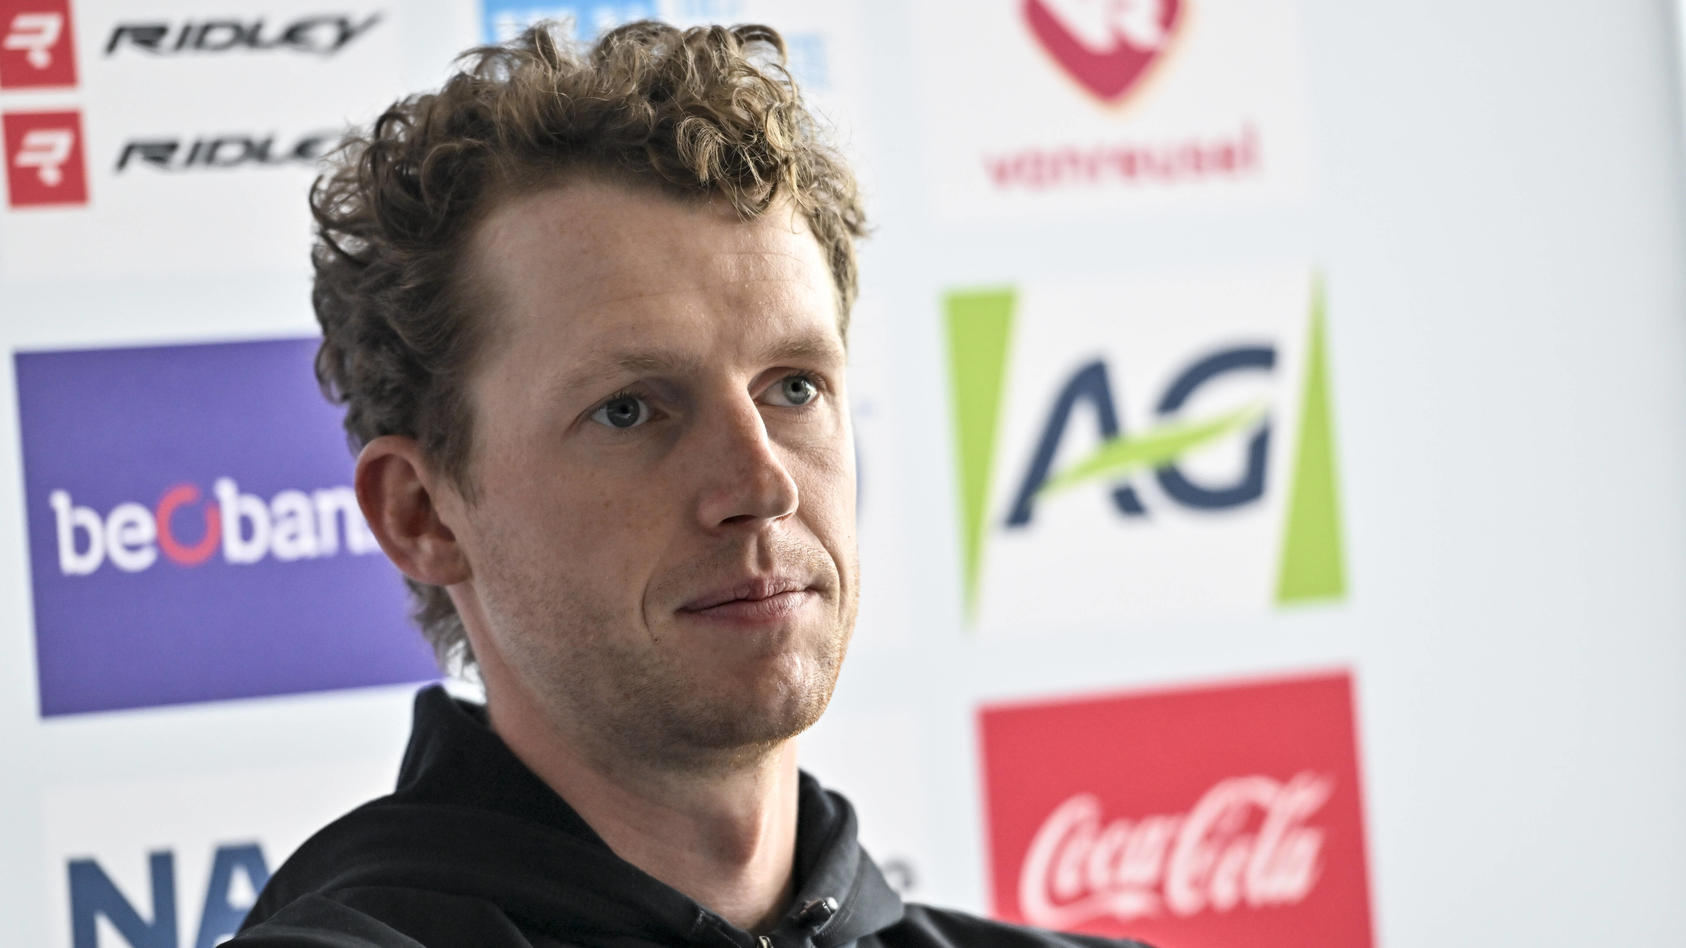 belgian-nathan-van-hooydonck-pictured-during-a-press-conference-pk-pressekonferenz-ahead-of-the-upcoming-uci-road-worl